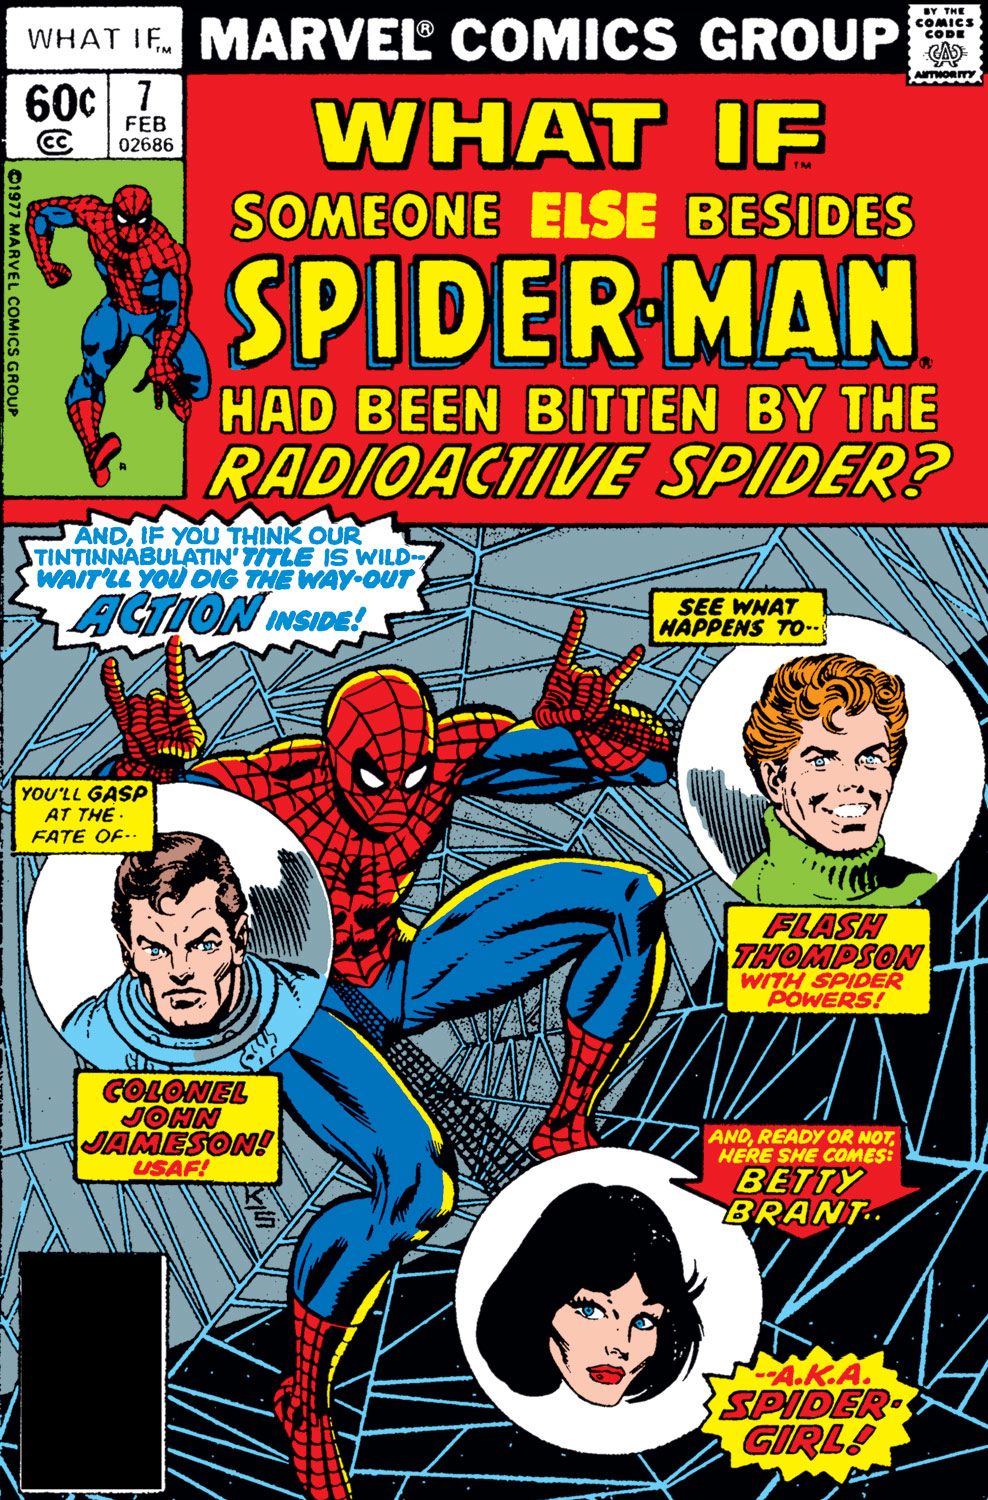 Read online What If? (1977) comic -  Issue #7 - Someone else besides Spider-Man had been bitten by a radioactive spider - 1